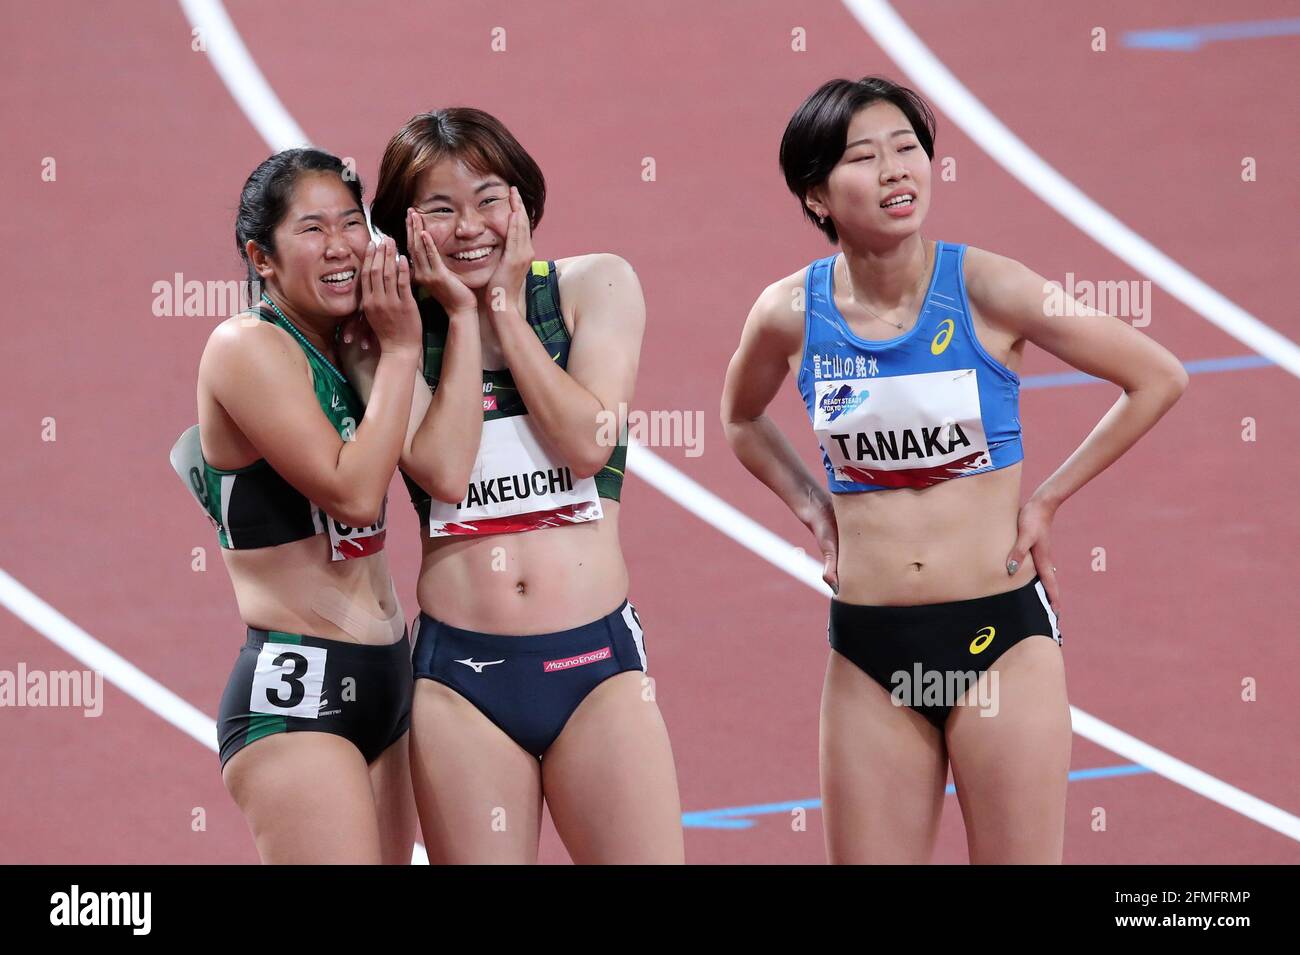 Games athletics tokyo 2020 olympic Olympic Games